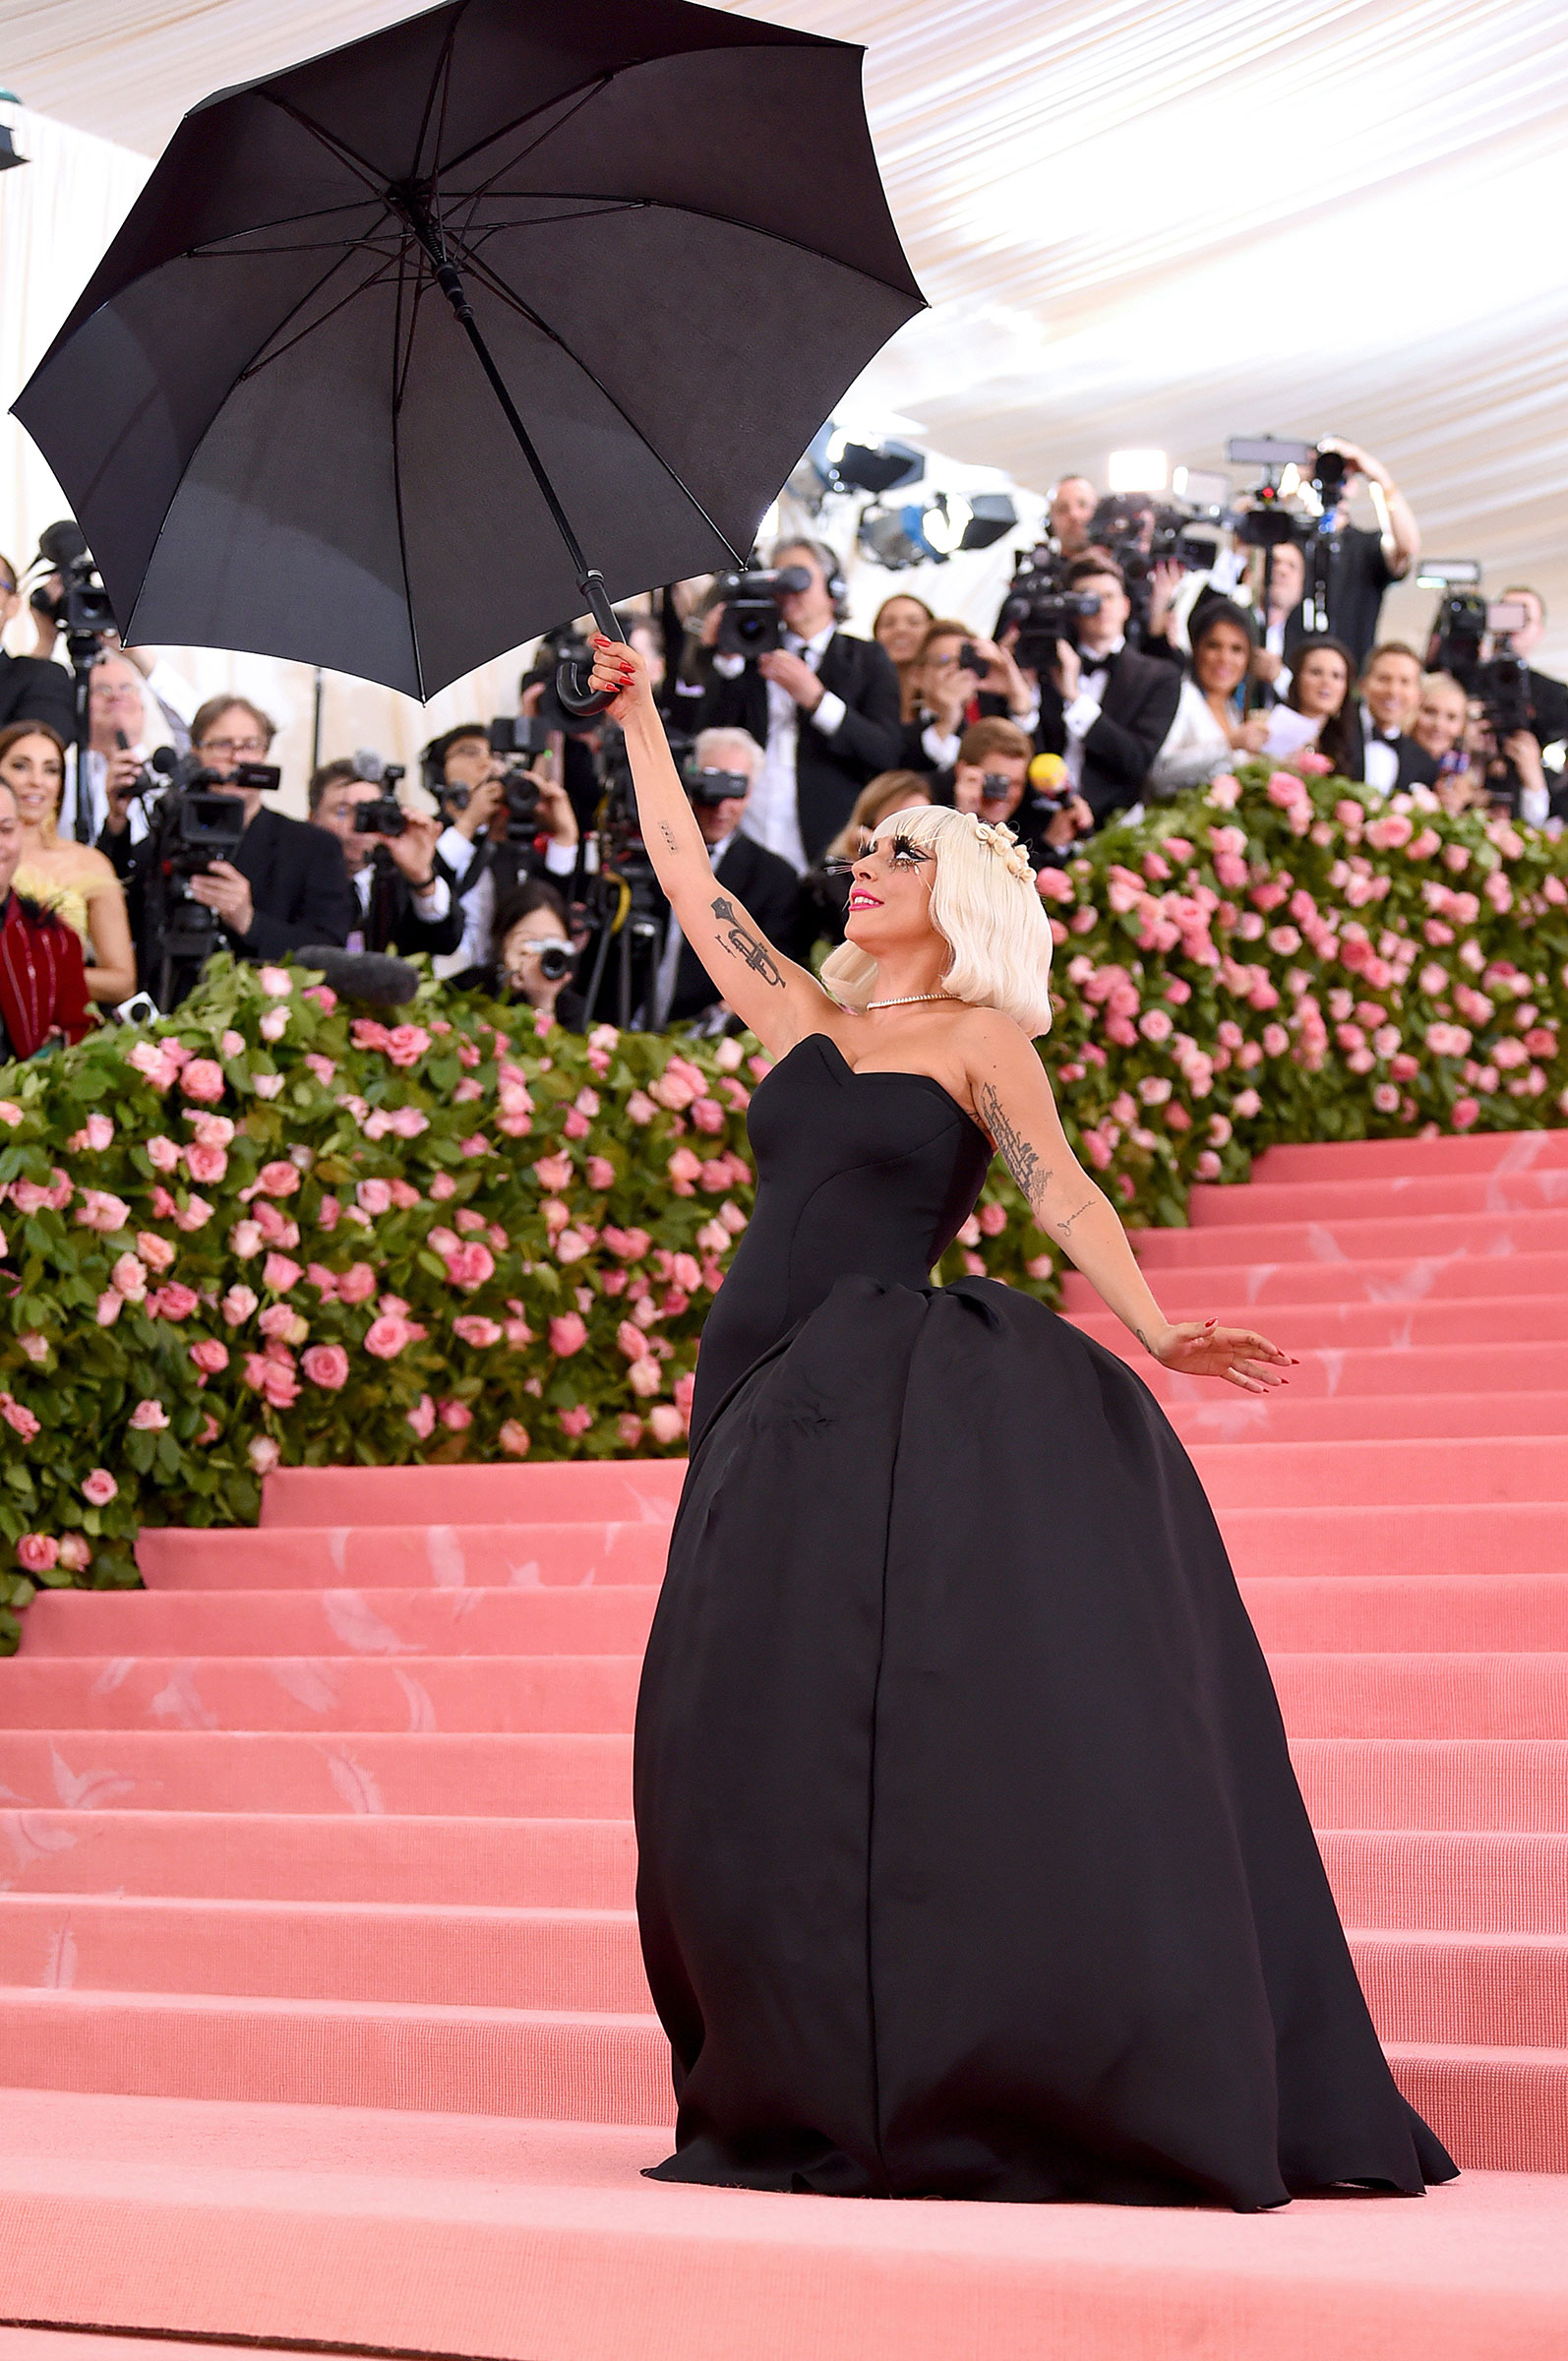 Lady Gaga attends The 2019 Met Gala Celebrating Camp: Notes on Fashion at Metropolitan Museum of Art in New York City on May 06, 2019. (Jamie McCarthy—Getty Images)